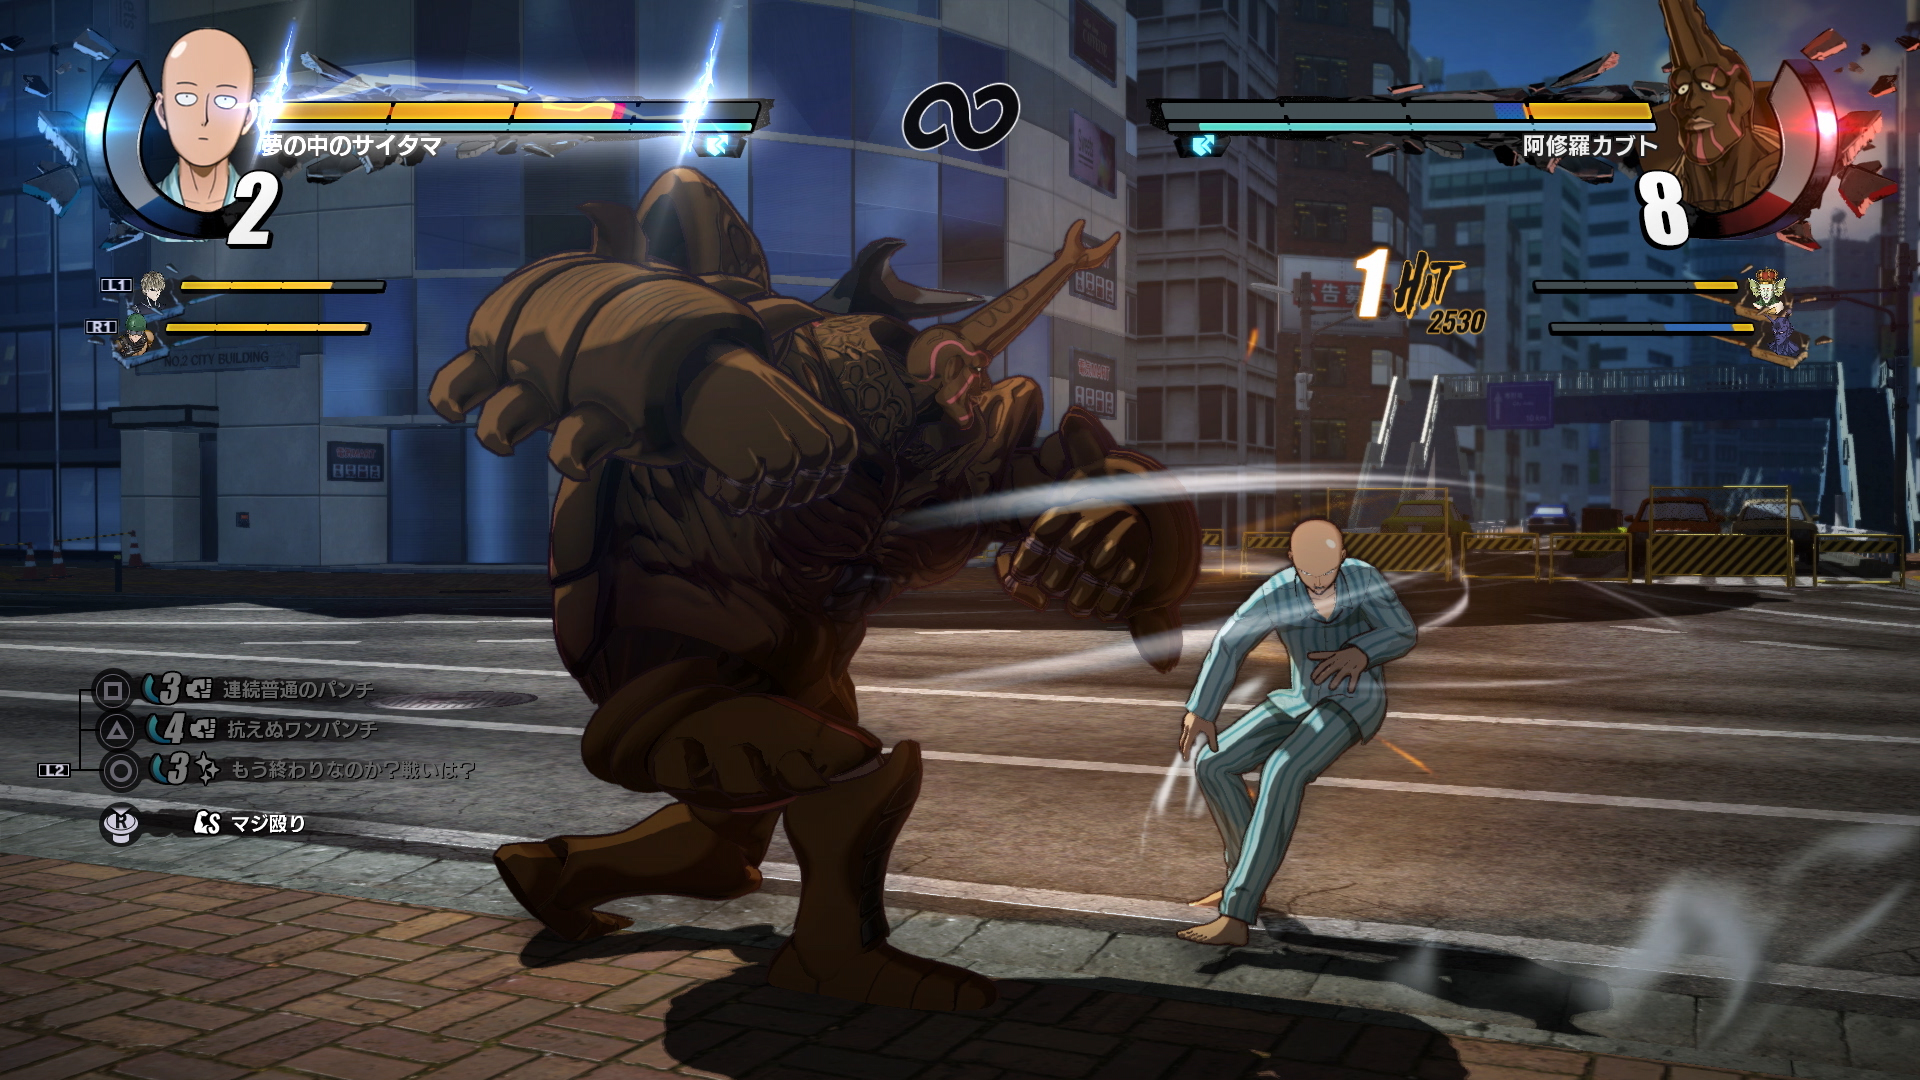 One punch game. One Punch игра. Punch man игра. One-Punch man: a Hero Nobody knows. Punch Hero игра.